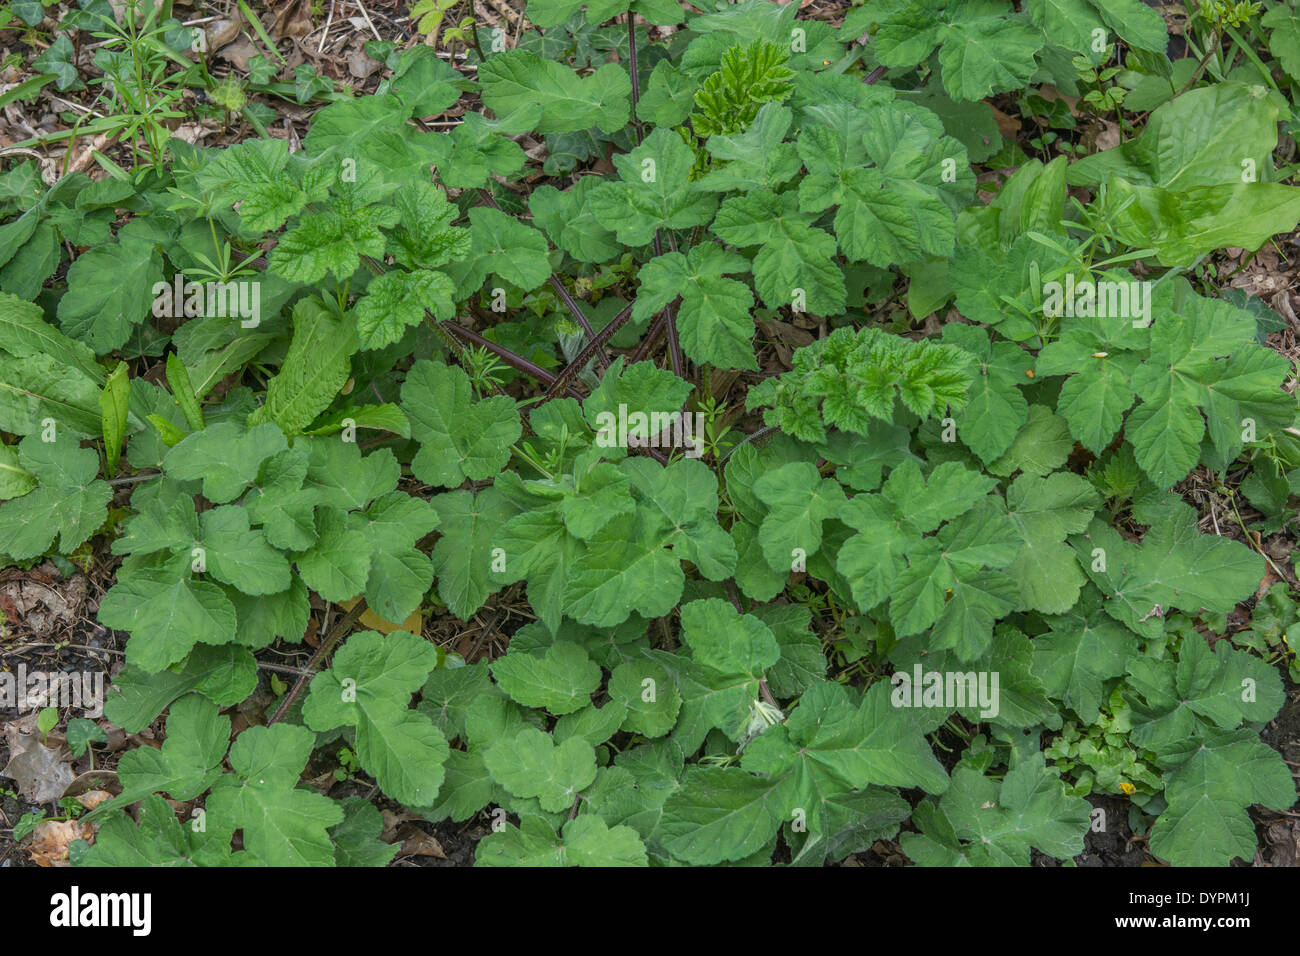 Common Hogweed / Cow Parsnip - Heracleum sphondylium - early pre-flowering foliage (April). Cow parsley family. Stock Photo